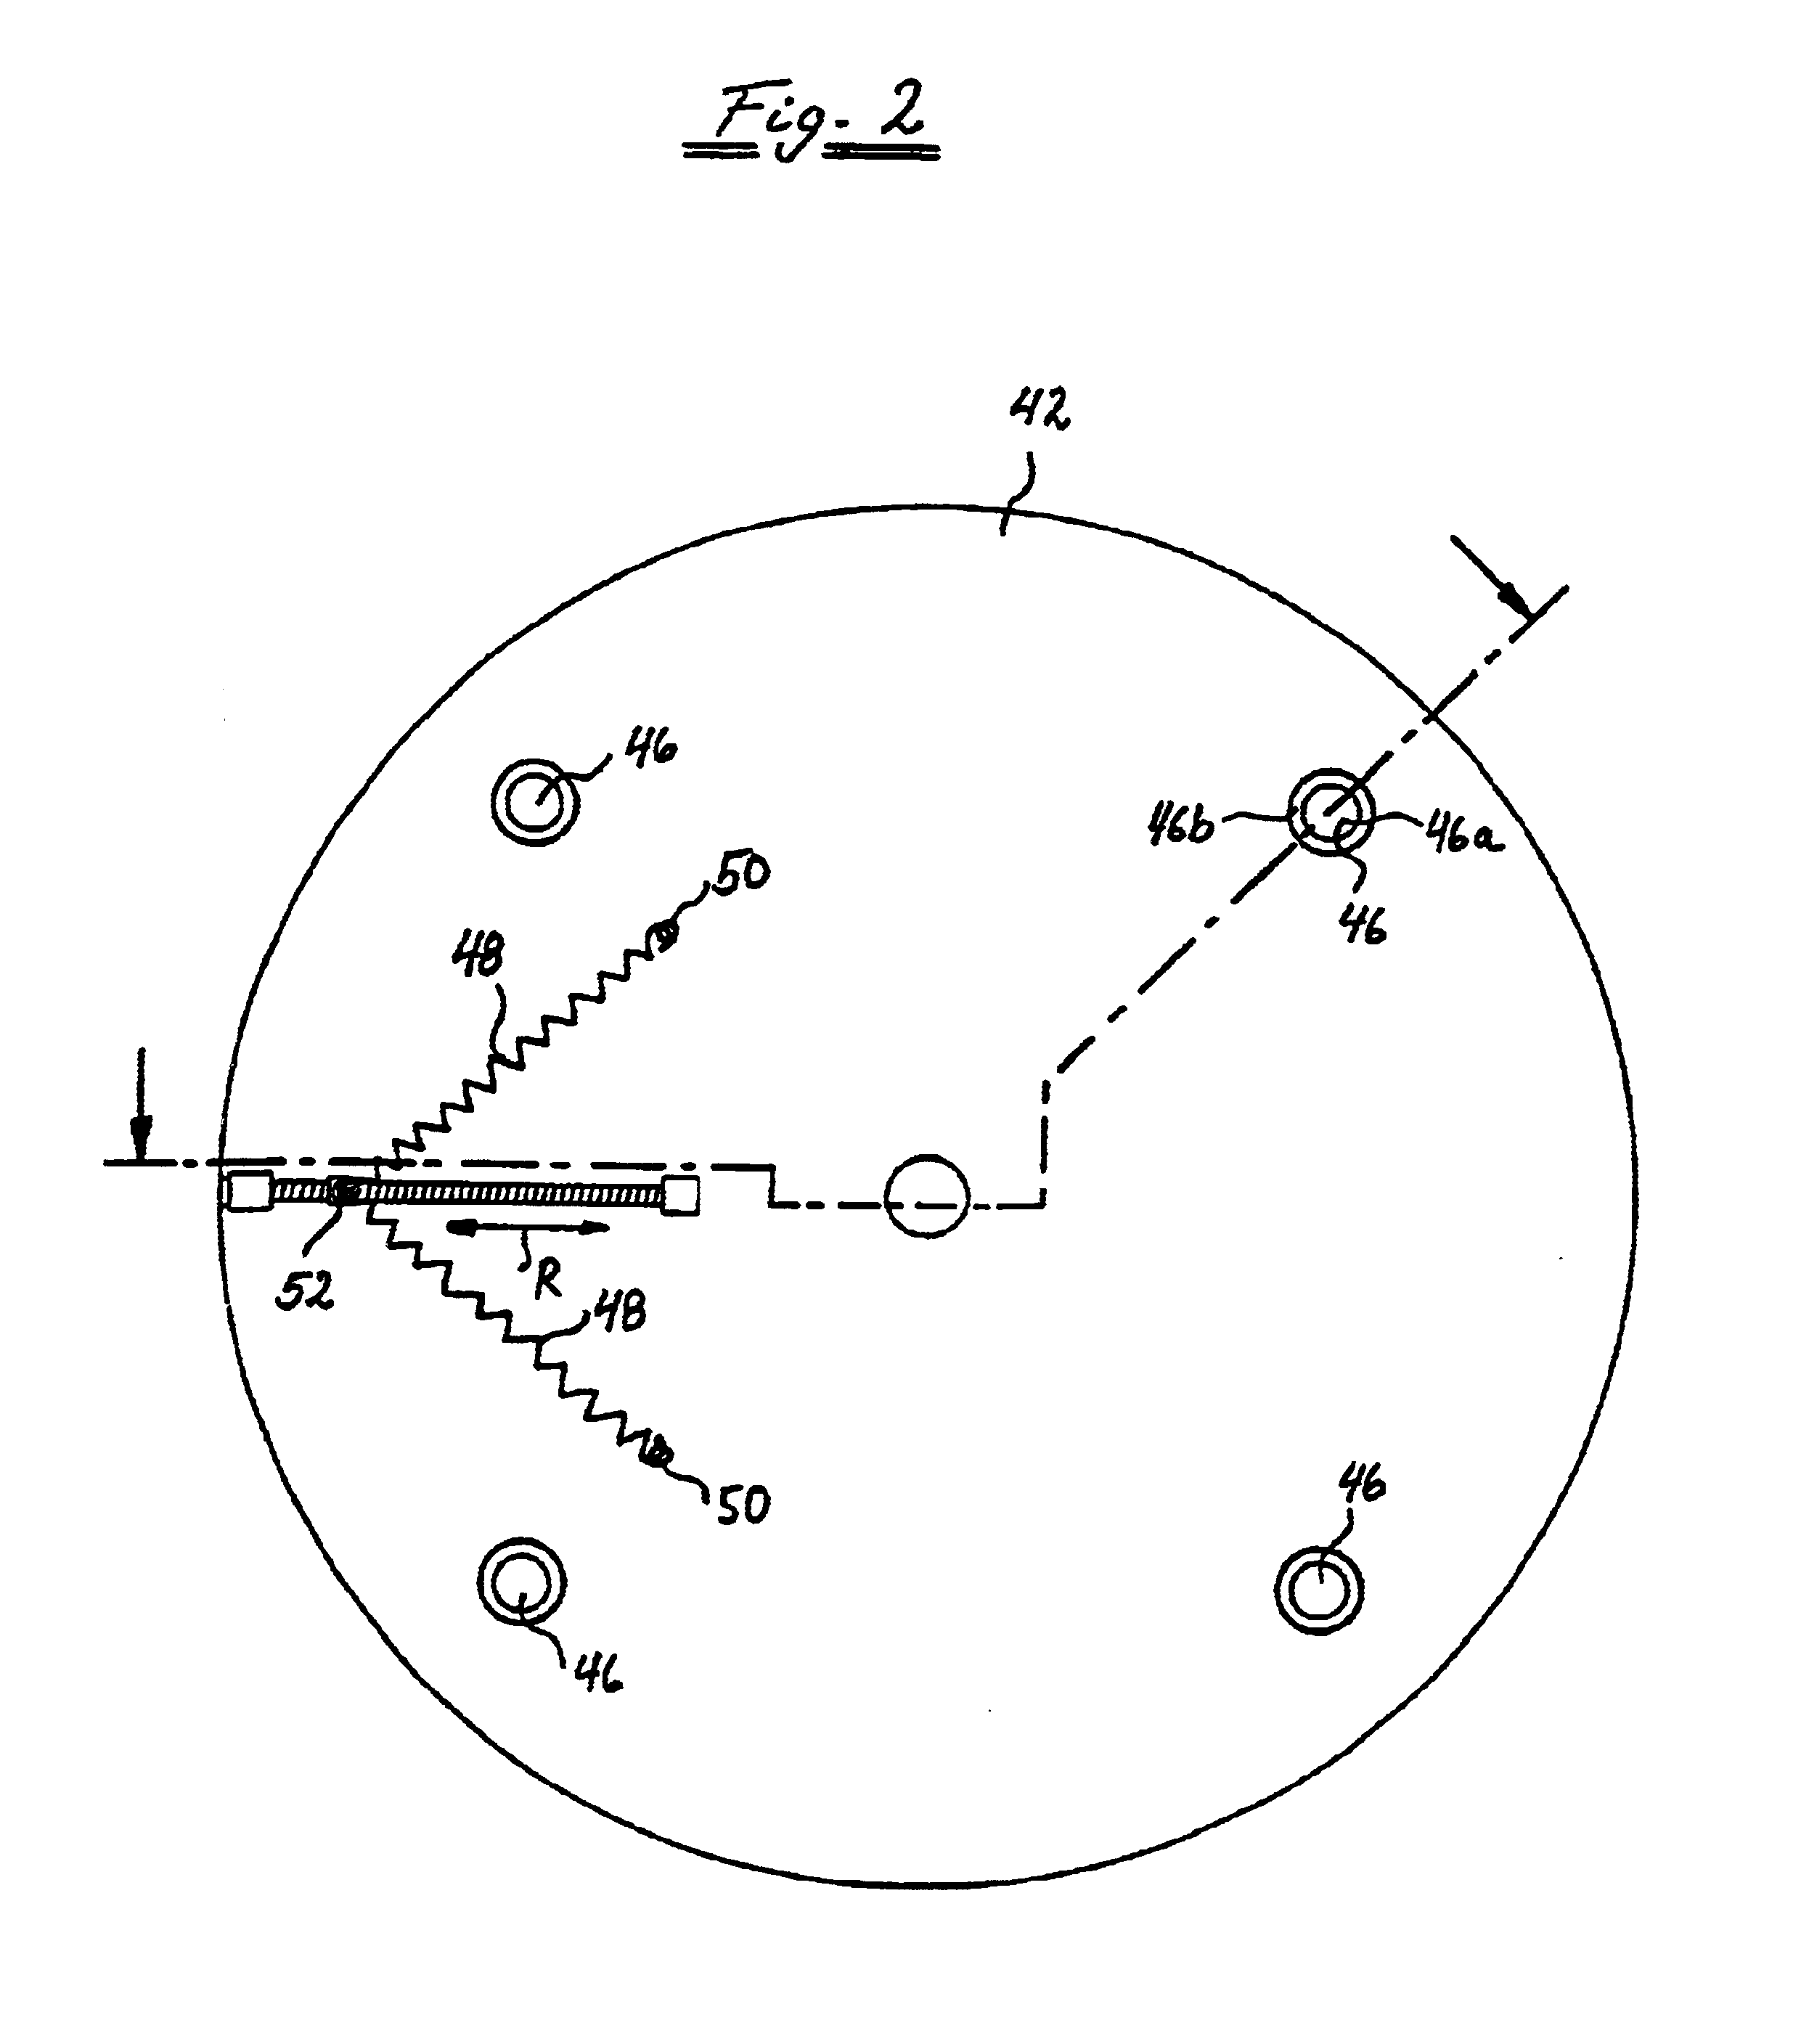 Method and device for detecting specific states of movement of a user